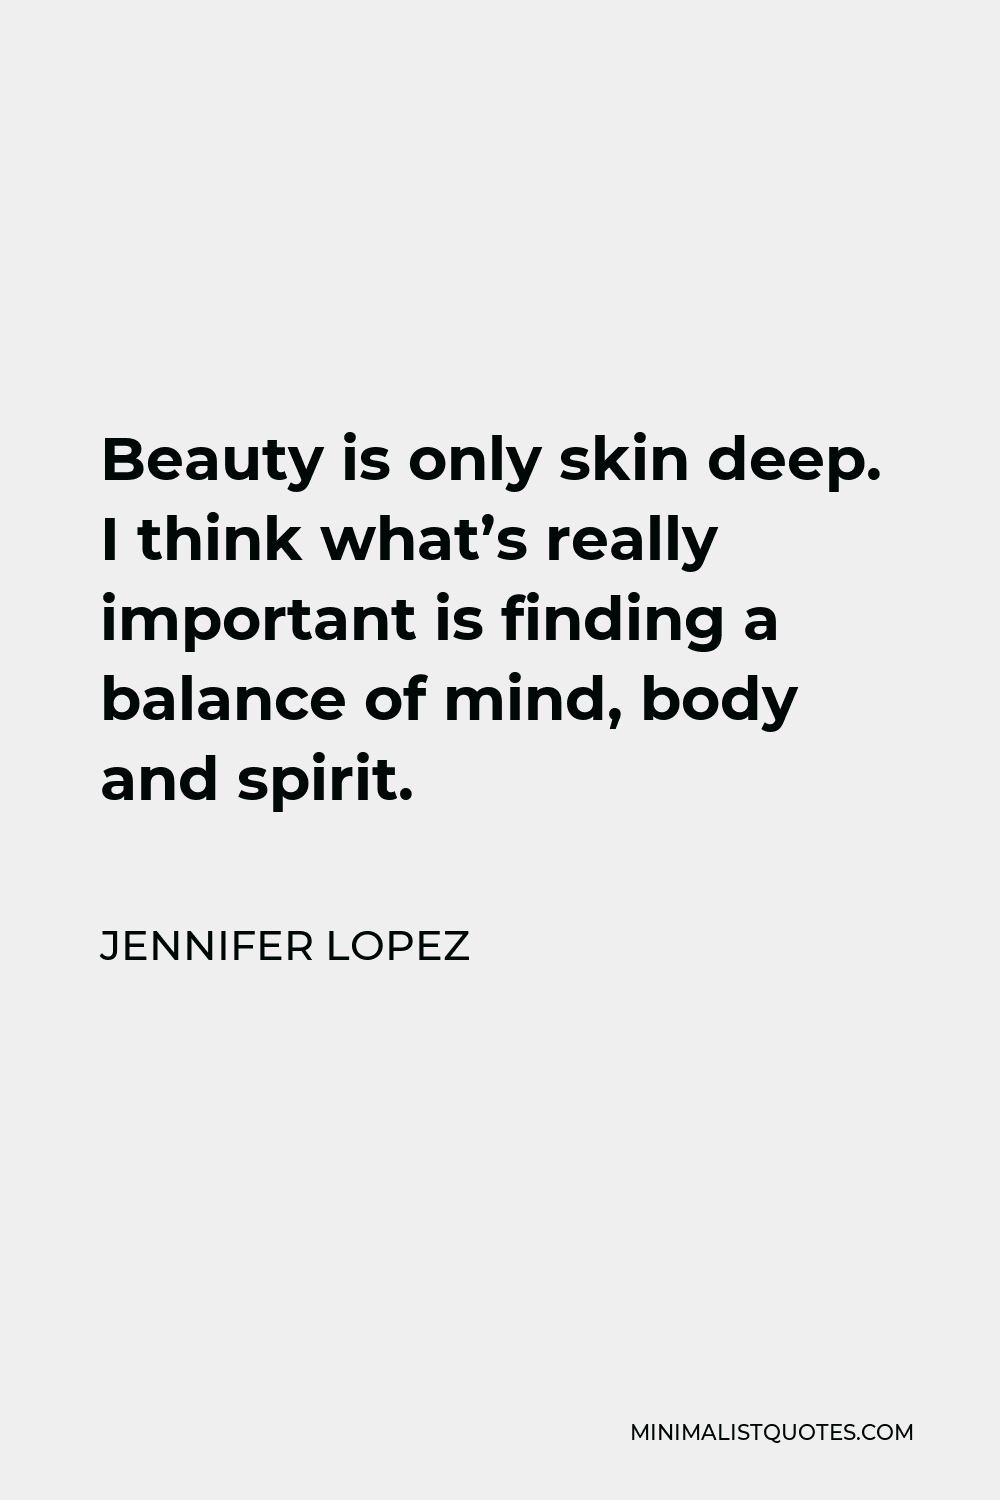 Jennifer Lopez Quote - Beauty is only skin deep. I think what’s really important is finding a balance of mind, body and spirit.